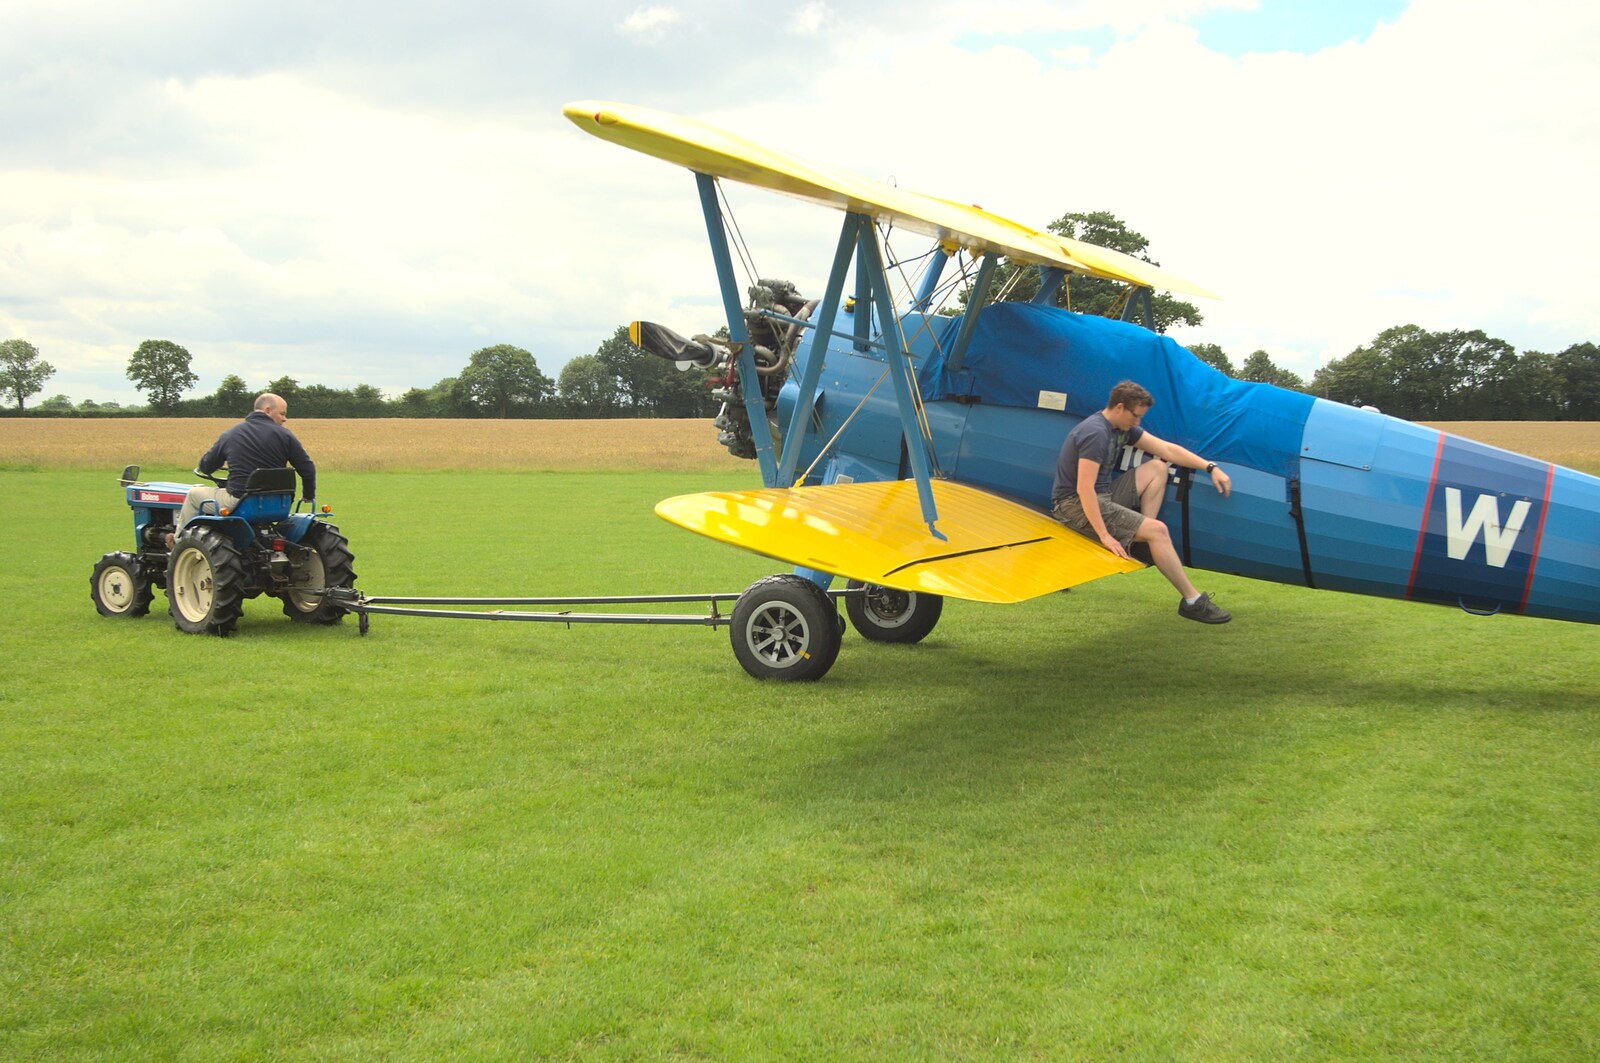 The Stearman is towed around from Maurice's Mustang Hangar Dance, Hardwick Airfield, Norfolk - 16th July 2011